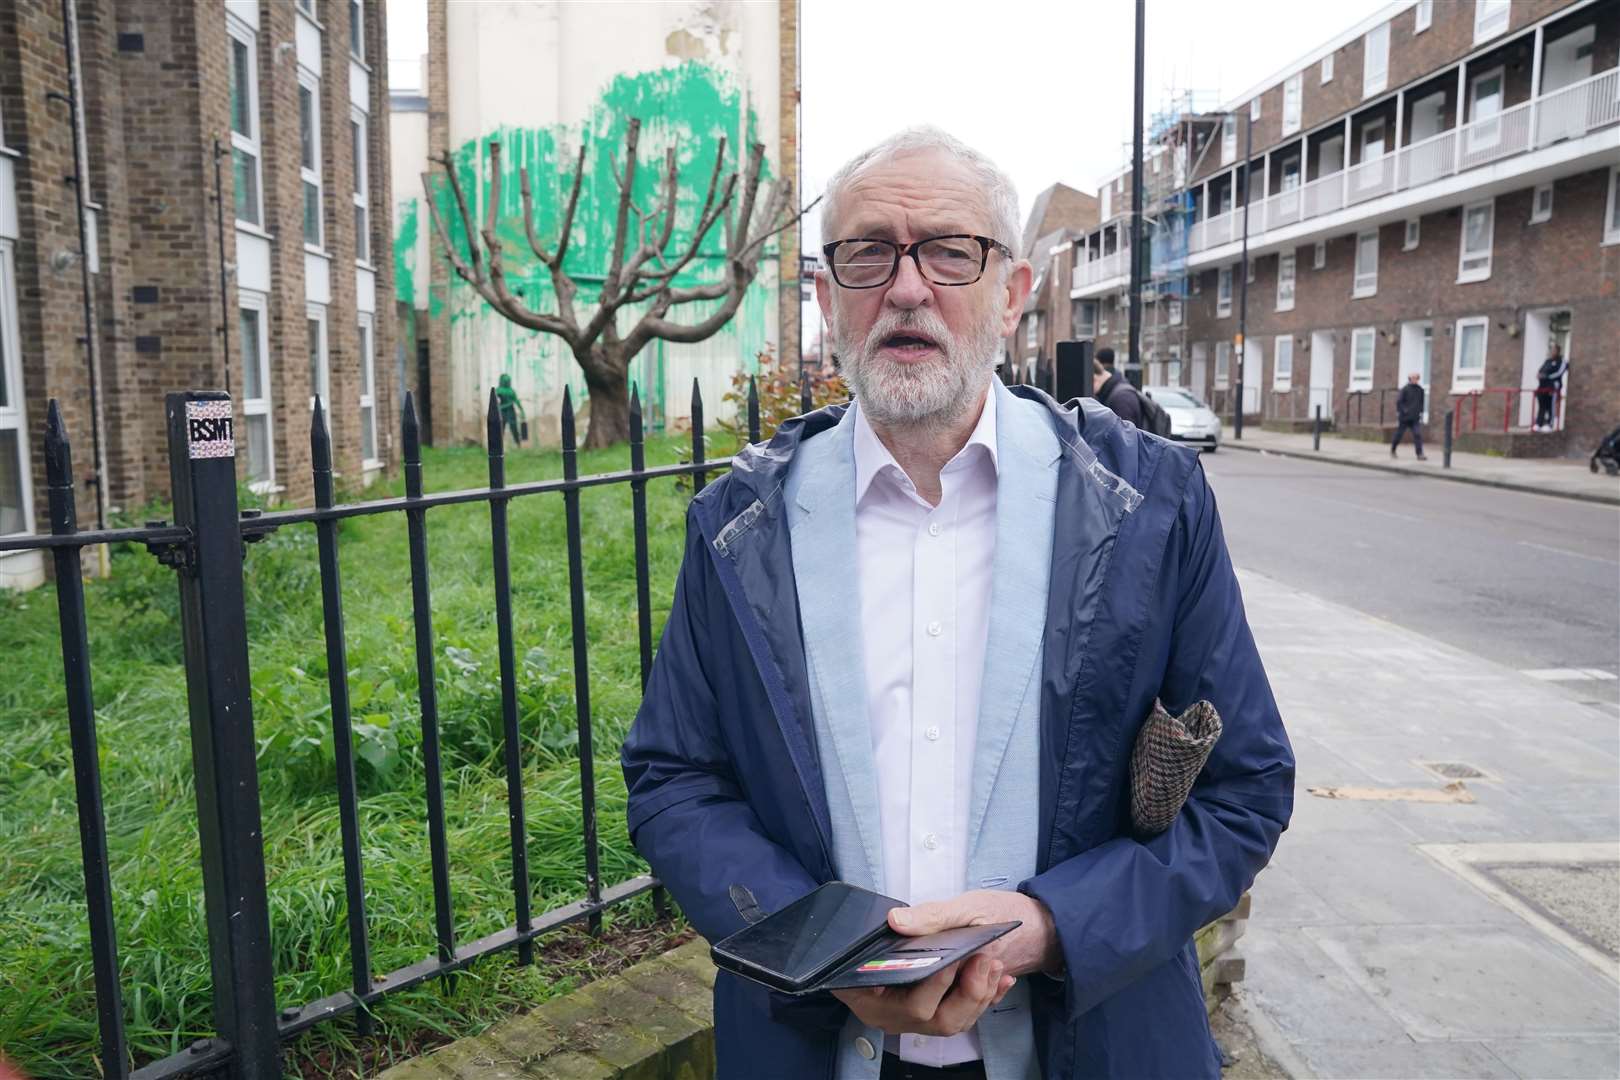 A report into antisemitism during Jeremy Corbyn’s leadership found the party was responsible for unlawful acts of harassment and discrimination (Jonathan Brady/PA)